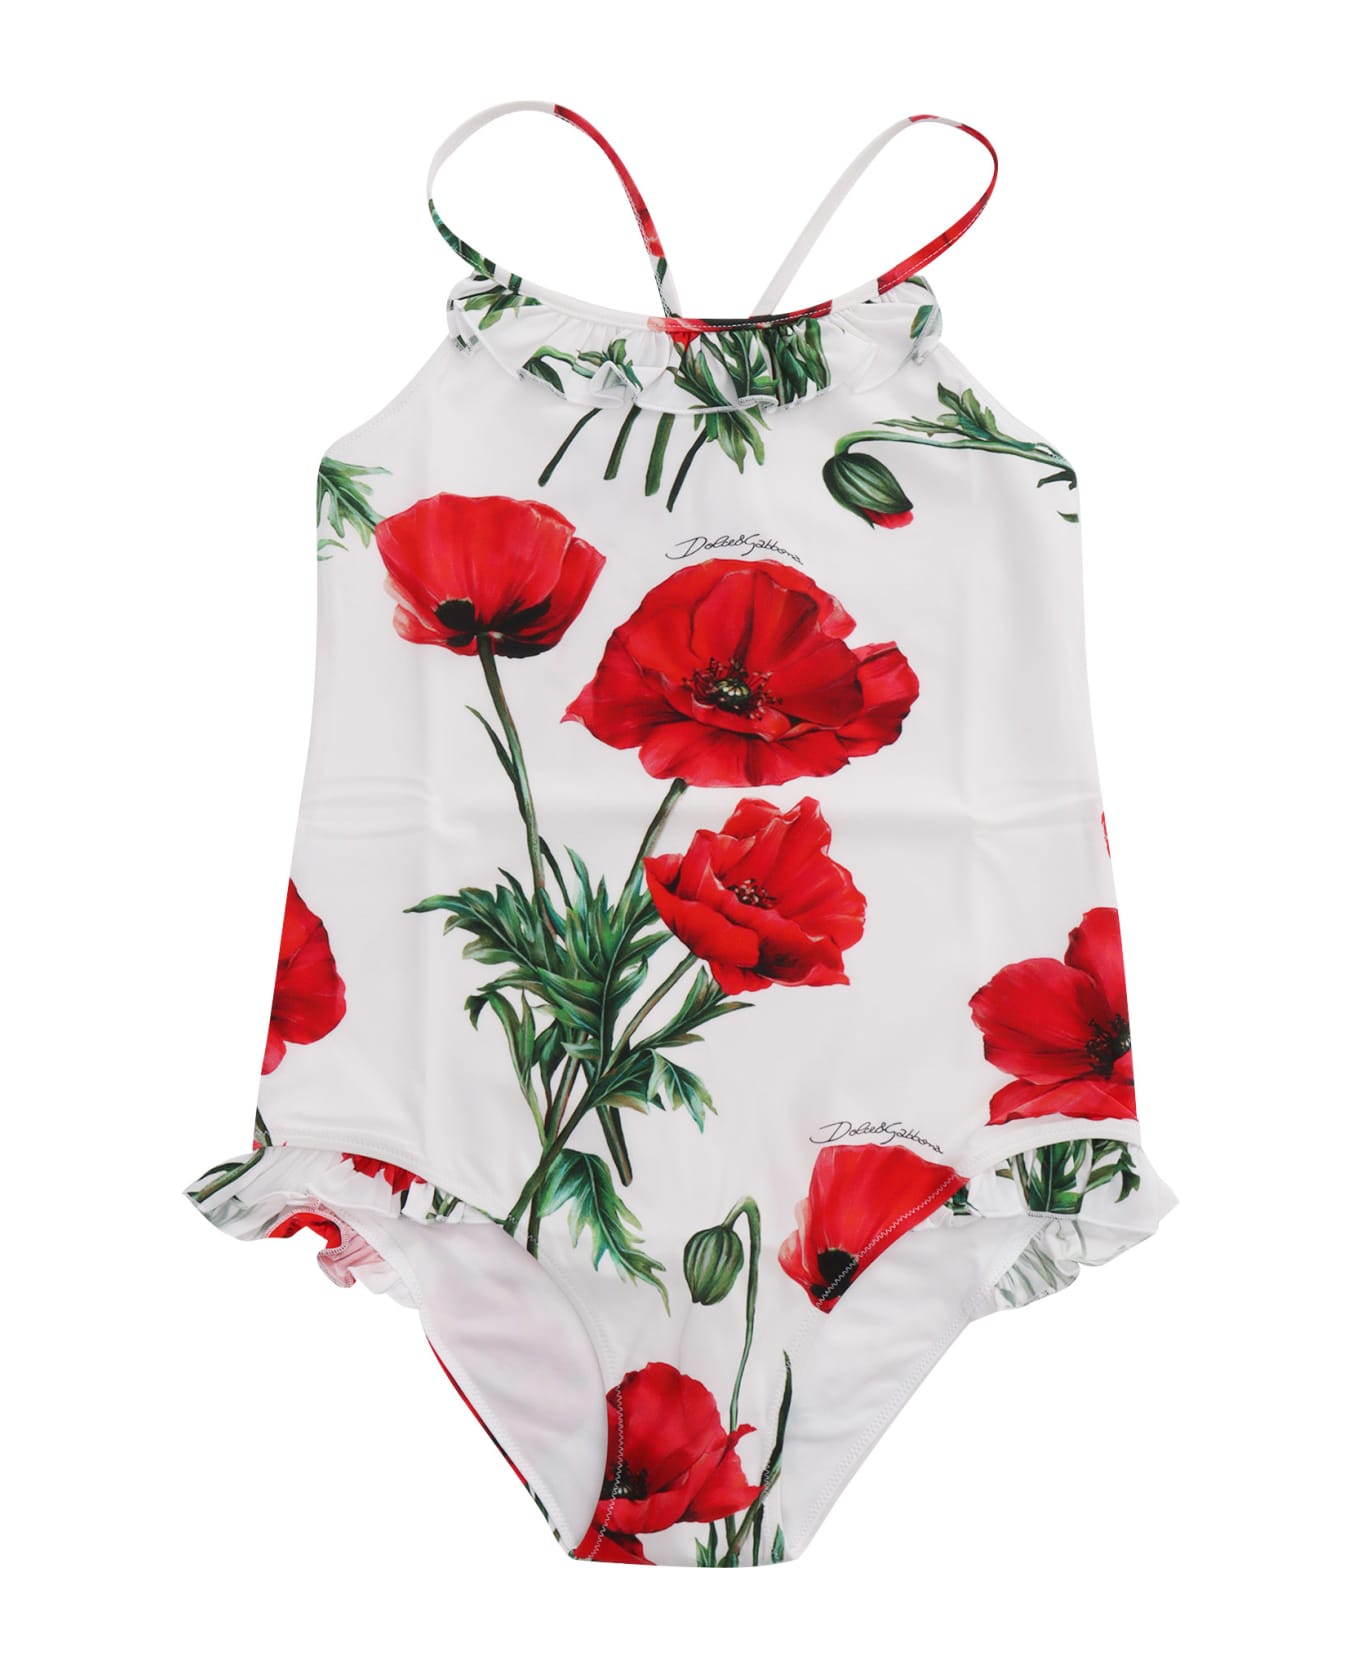 Dolce & Gabbana Floral Swimsuit - WHITE